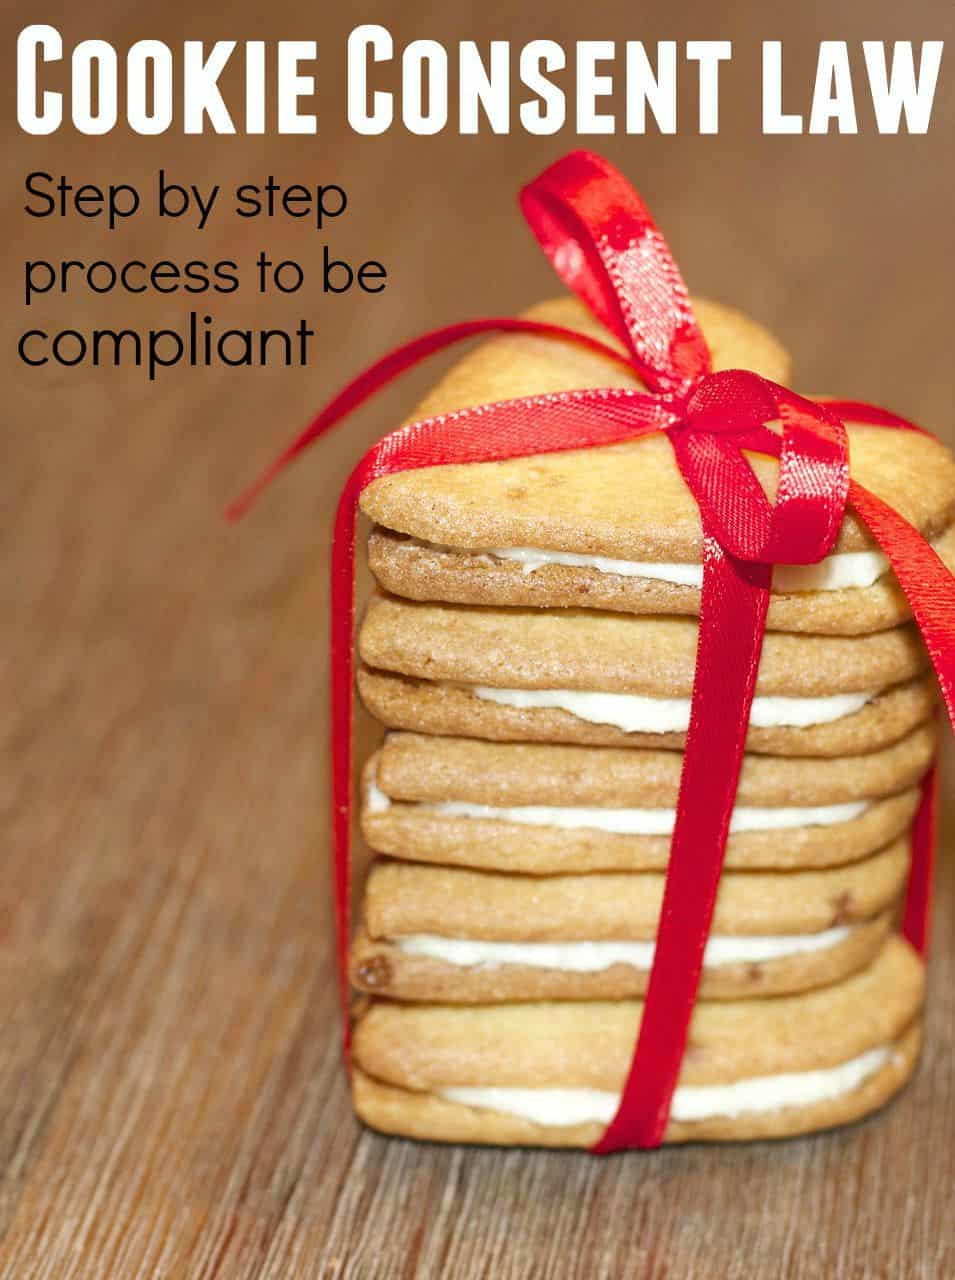 How to deal with the cookie consent law